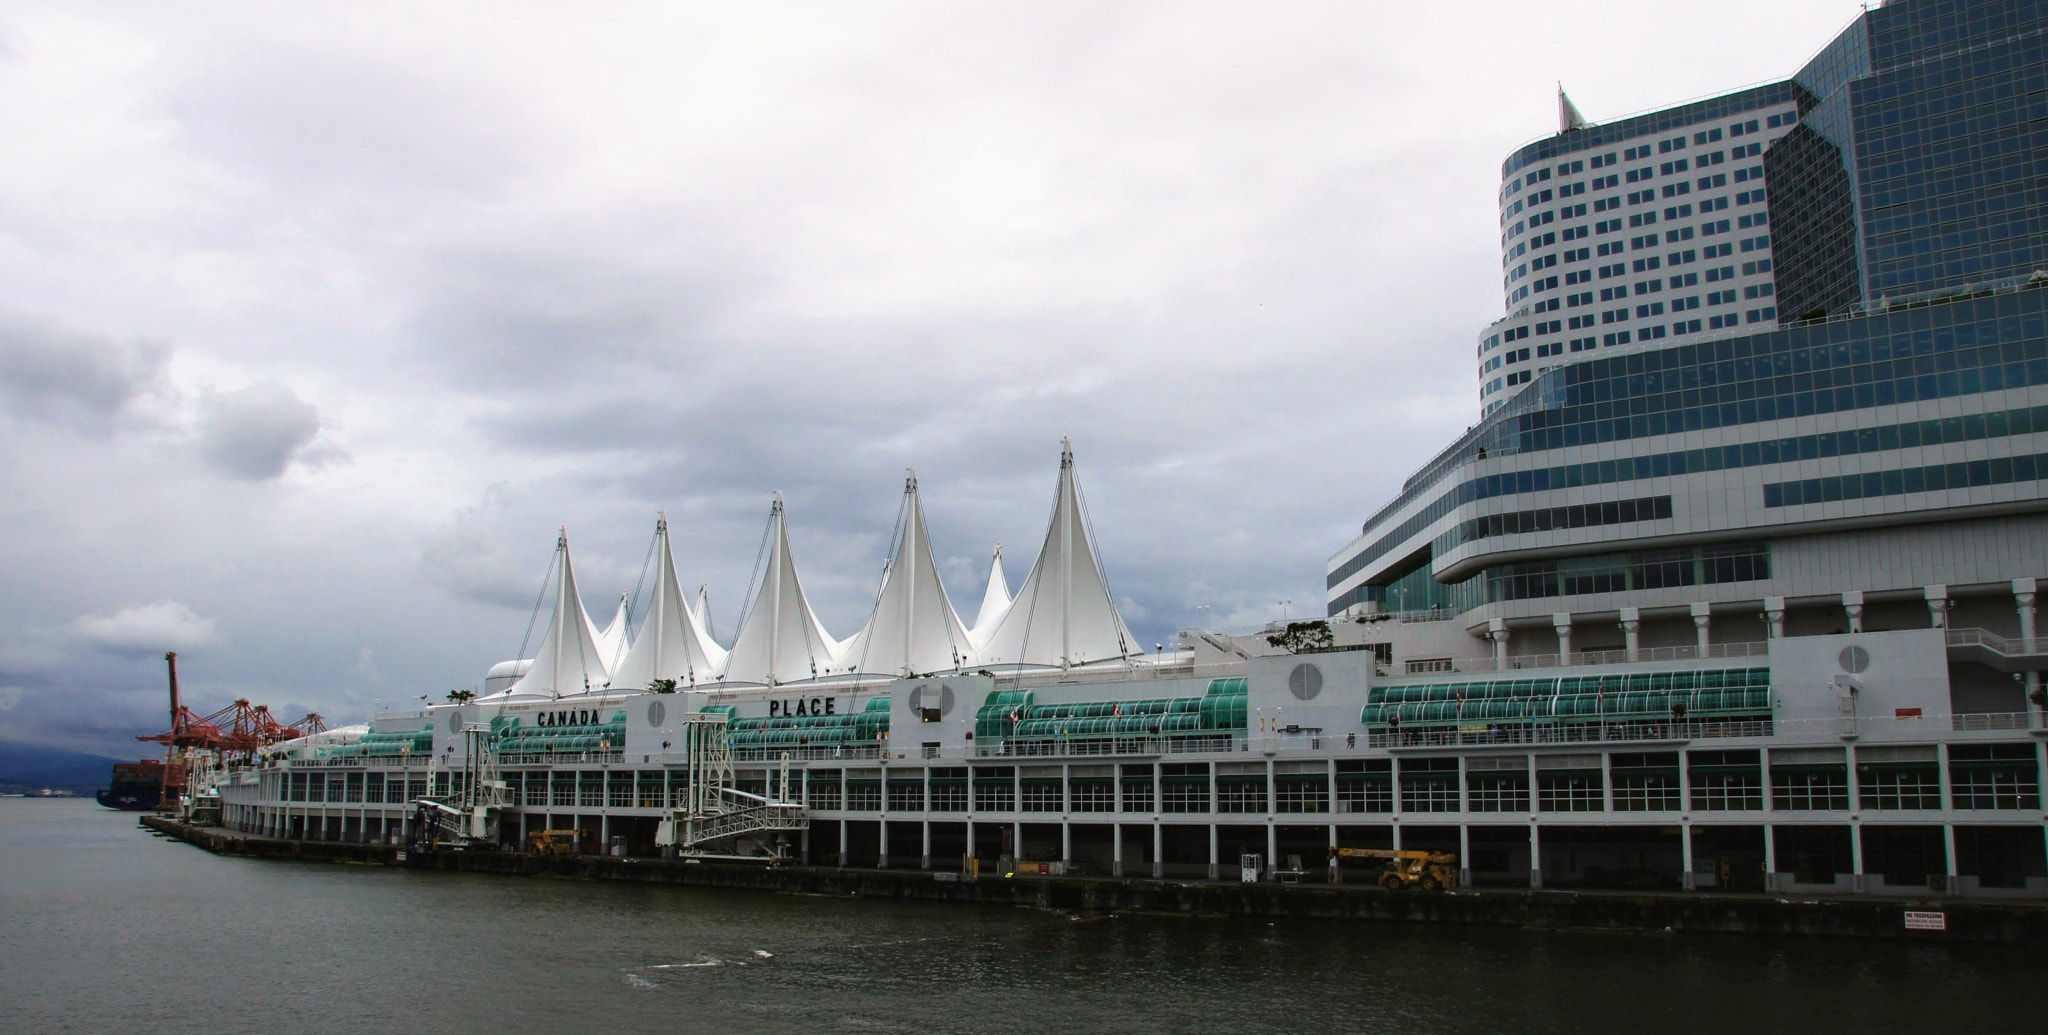 Sony SLT-A33 + Sony DT 16-105mm F3.5-5.6 sample photo. Vancouver, canada place photography